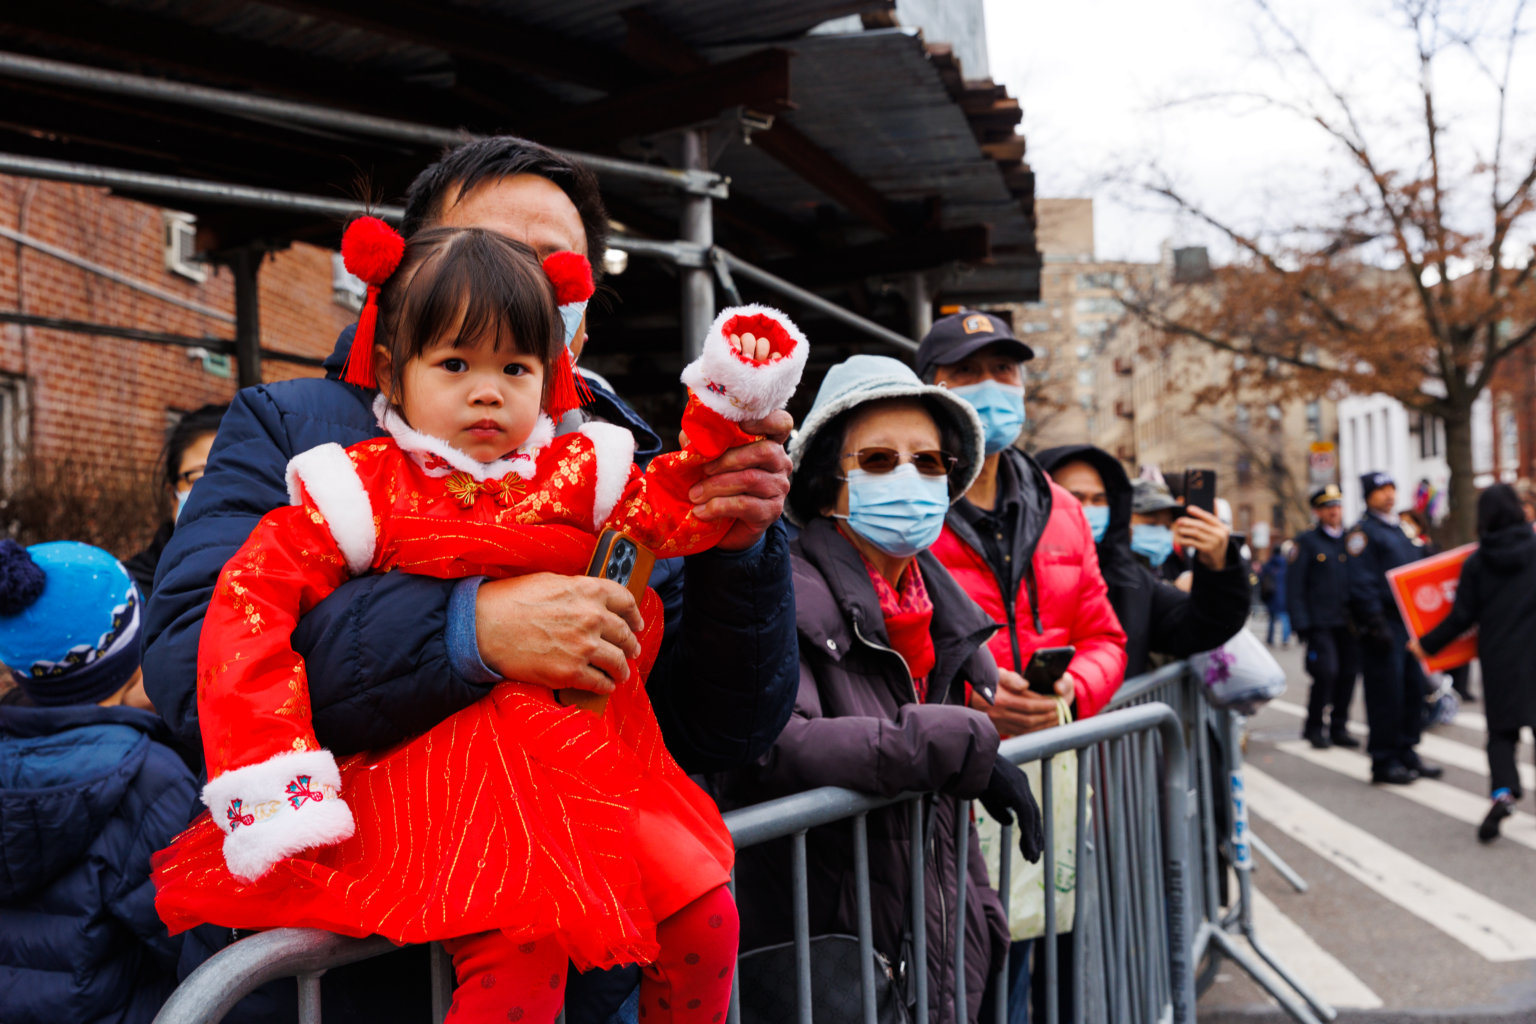 Thousands of revelers celebrate the Year of the Rabbit during Lunar New